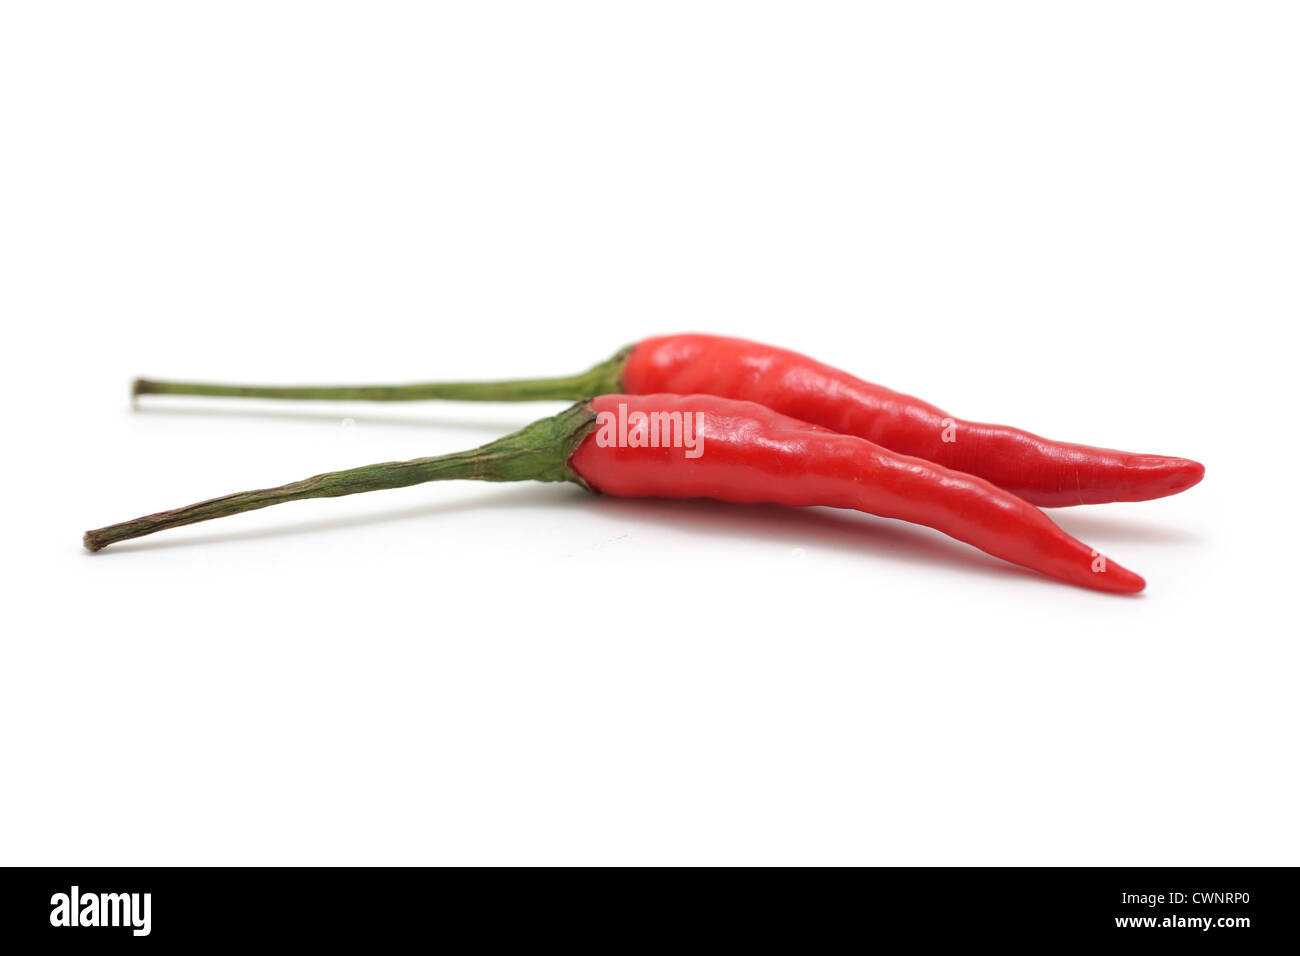 Red Chili Peppers, Hot Thai Chilis Stockfoto